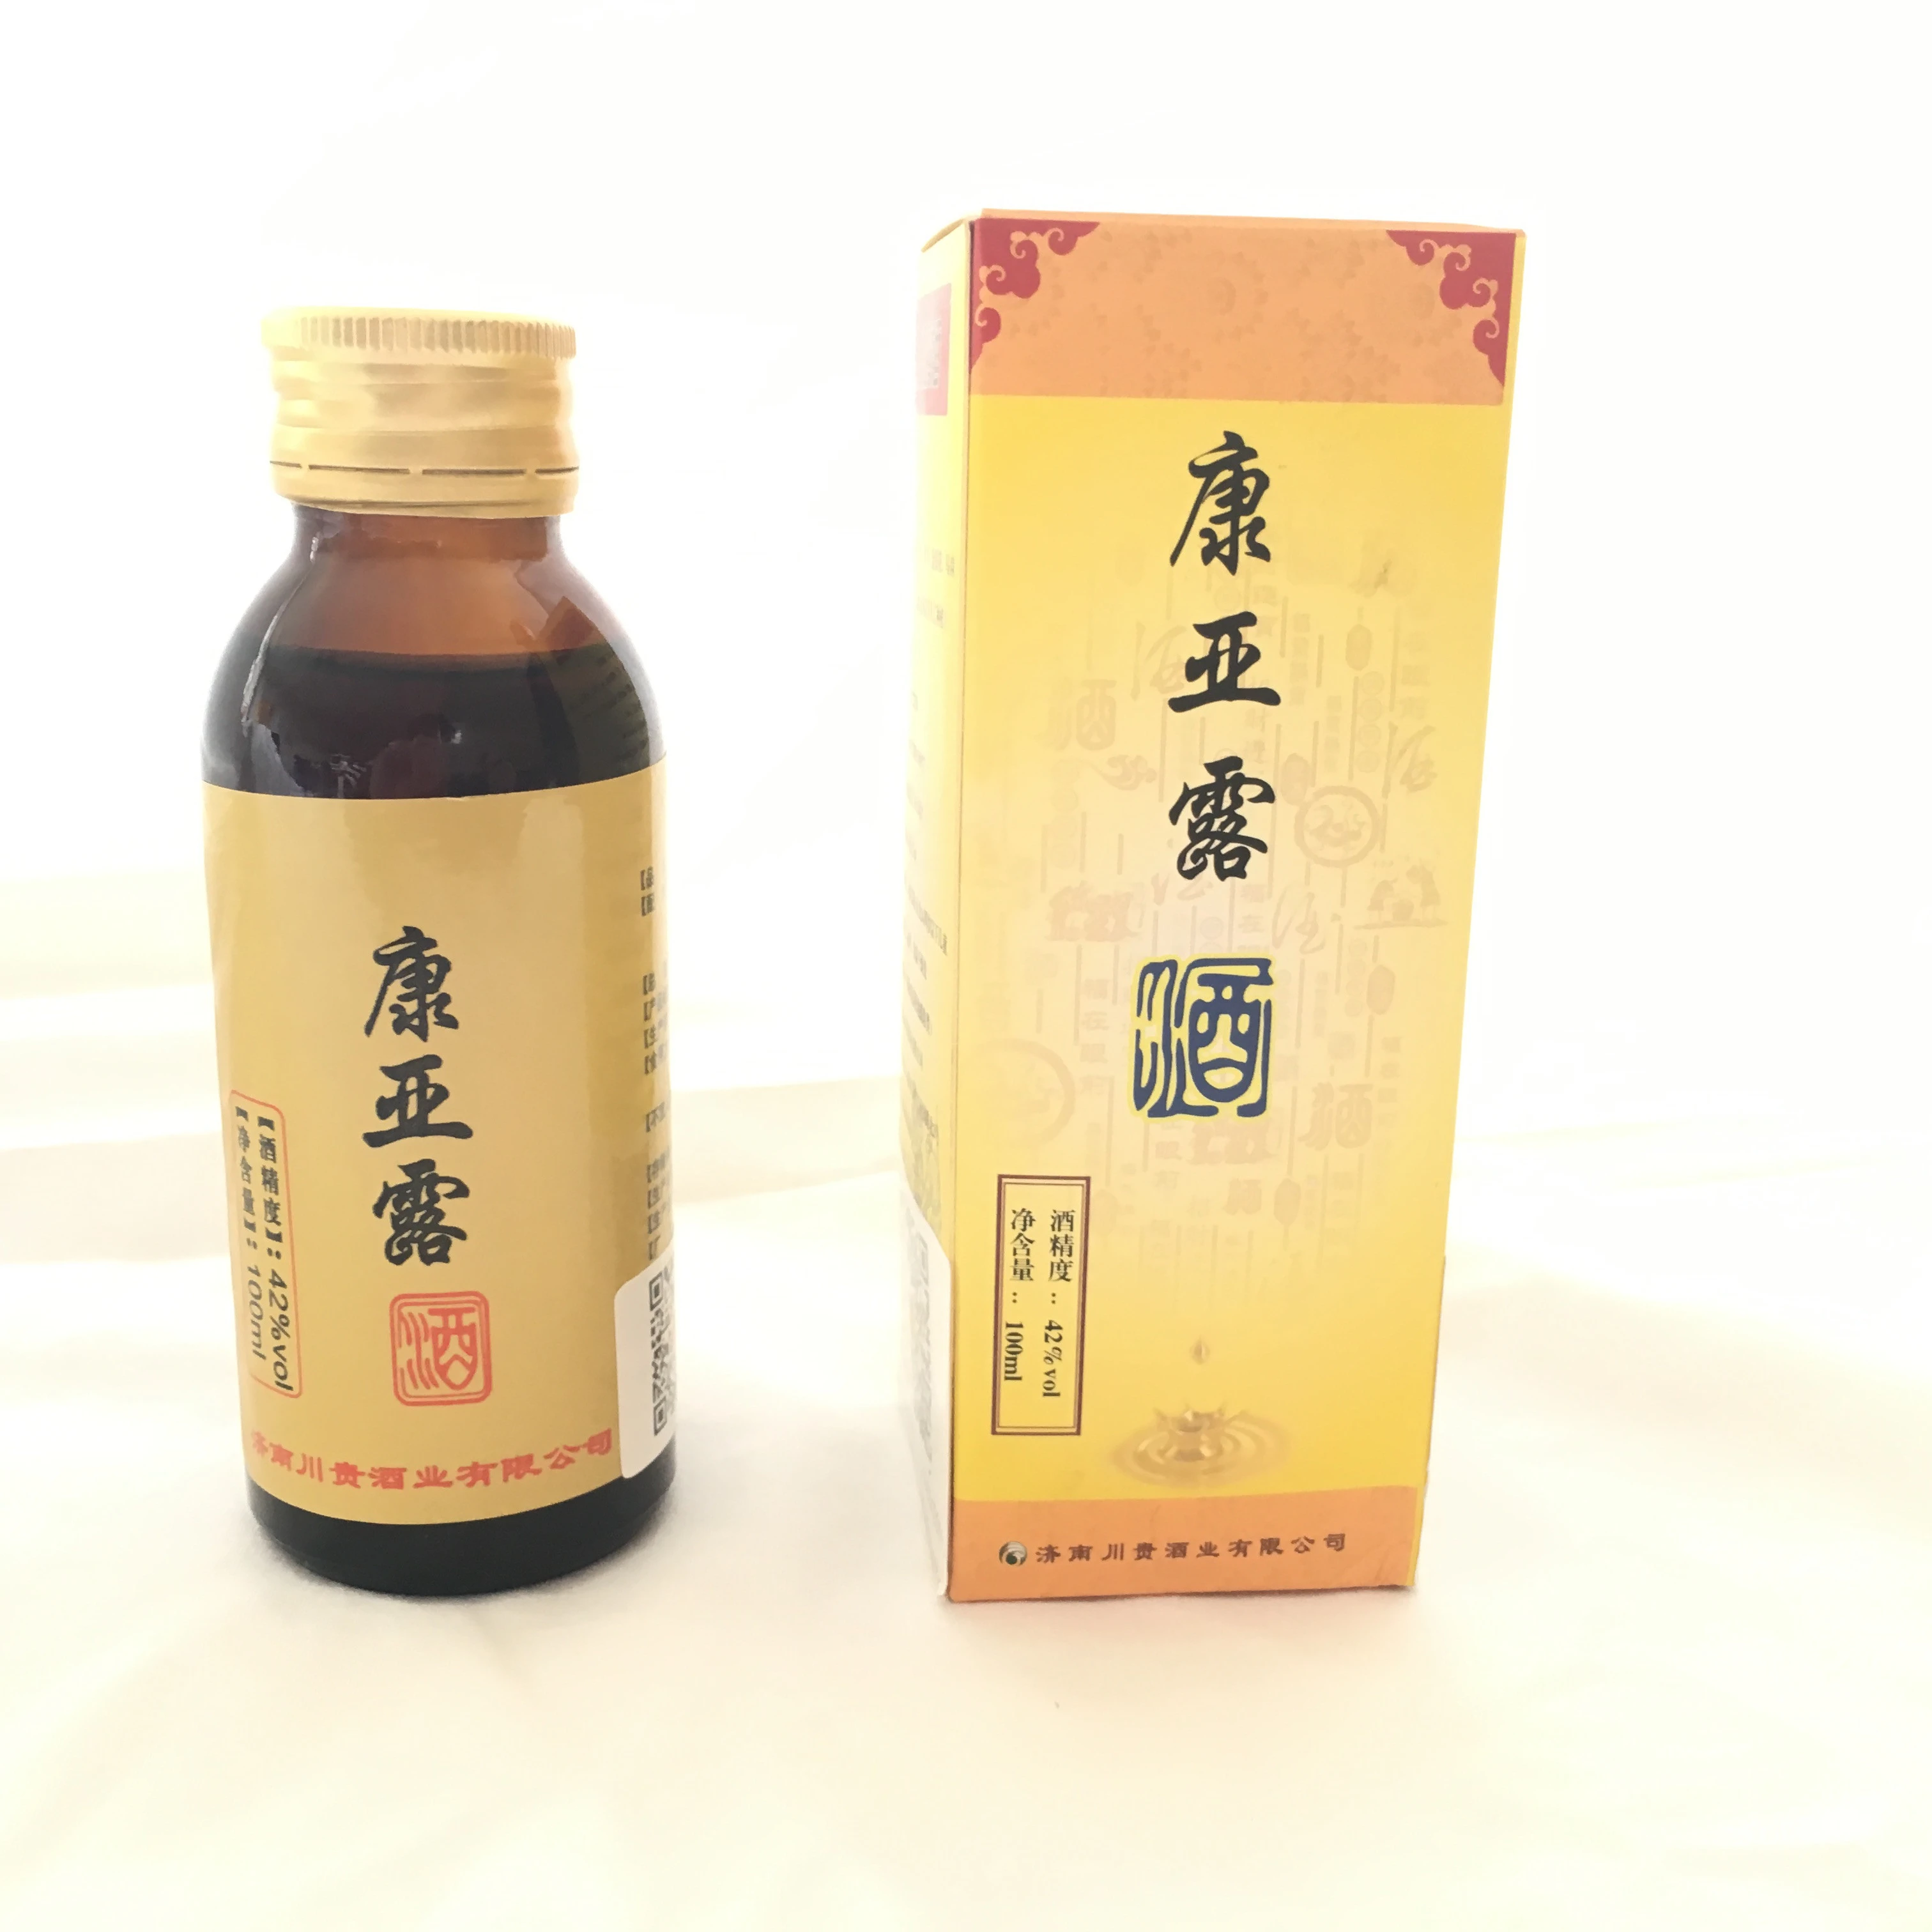 Traditional Chinese medicine for diabetic complications